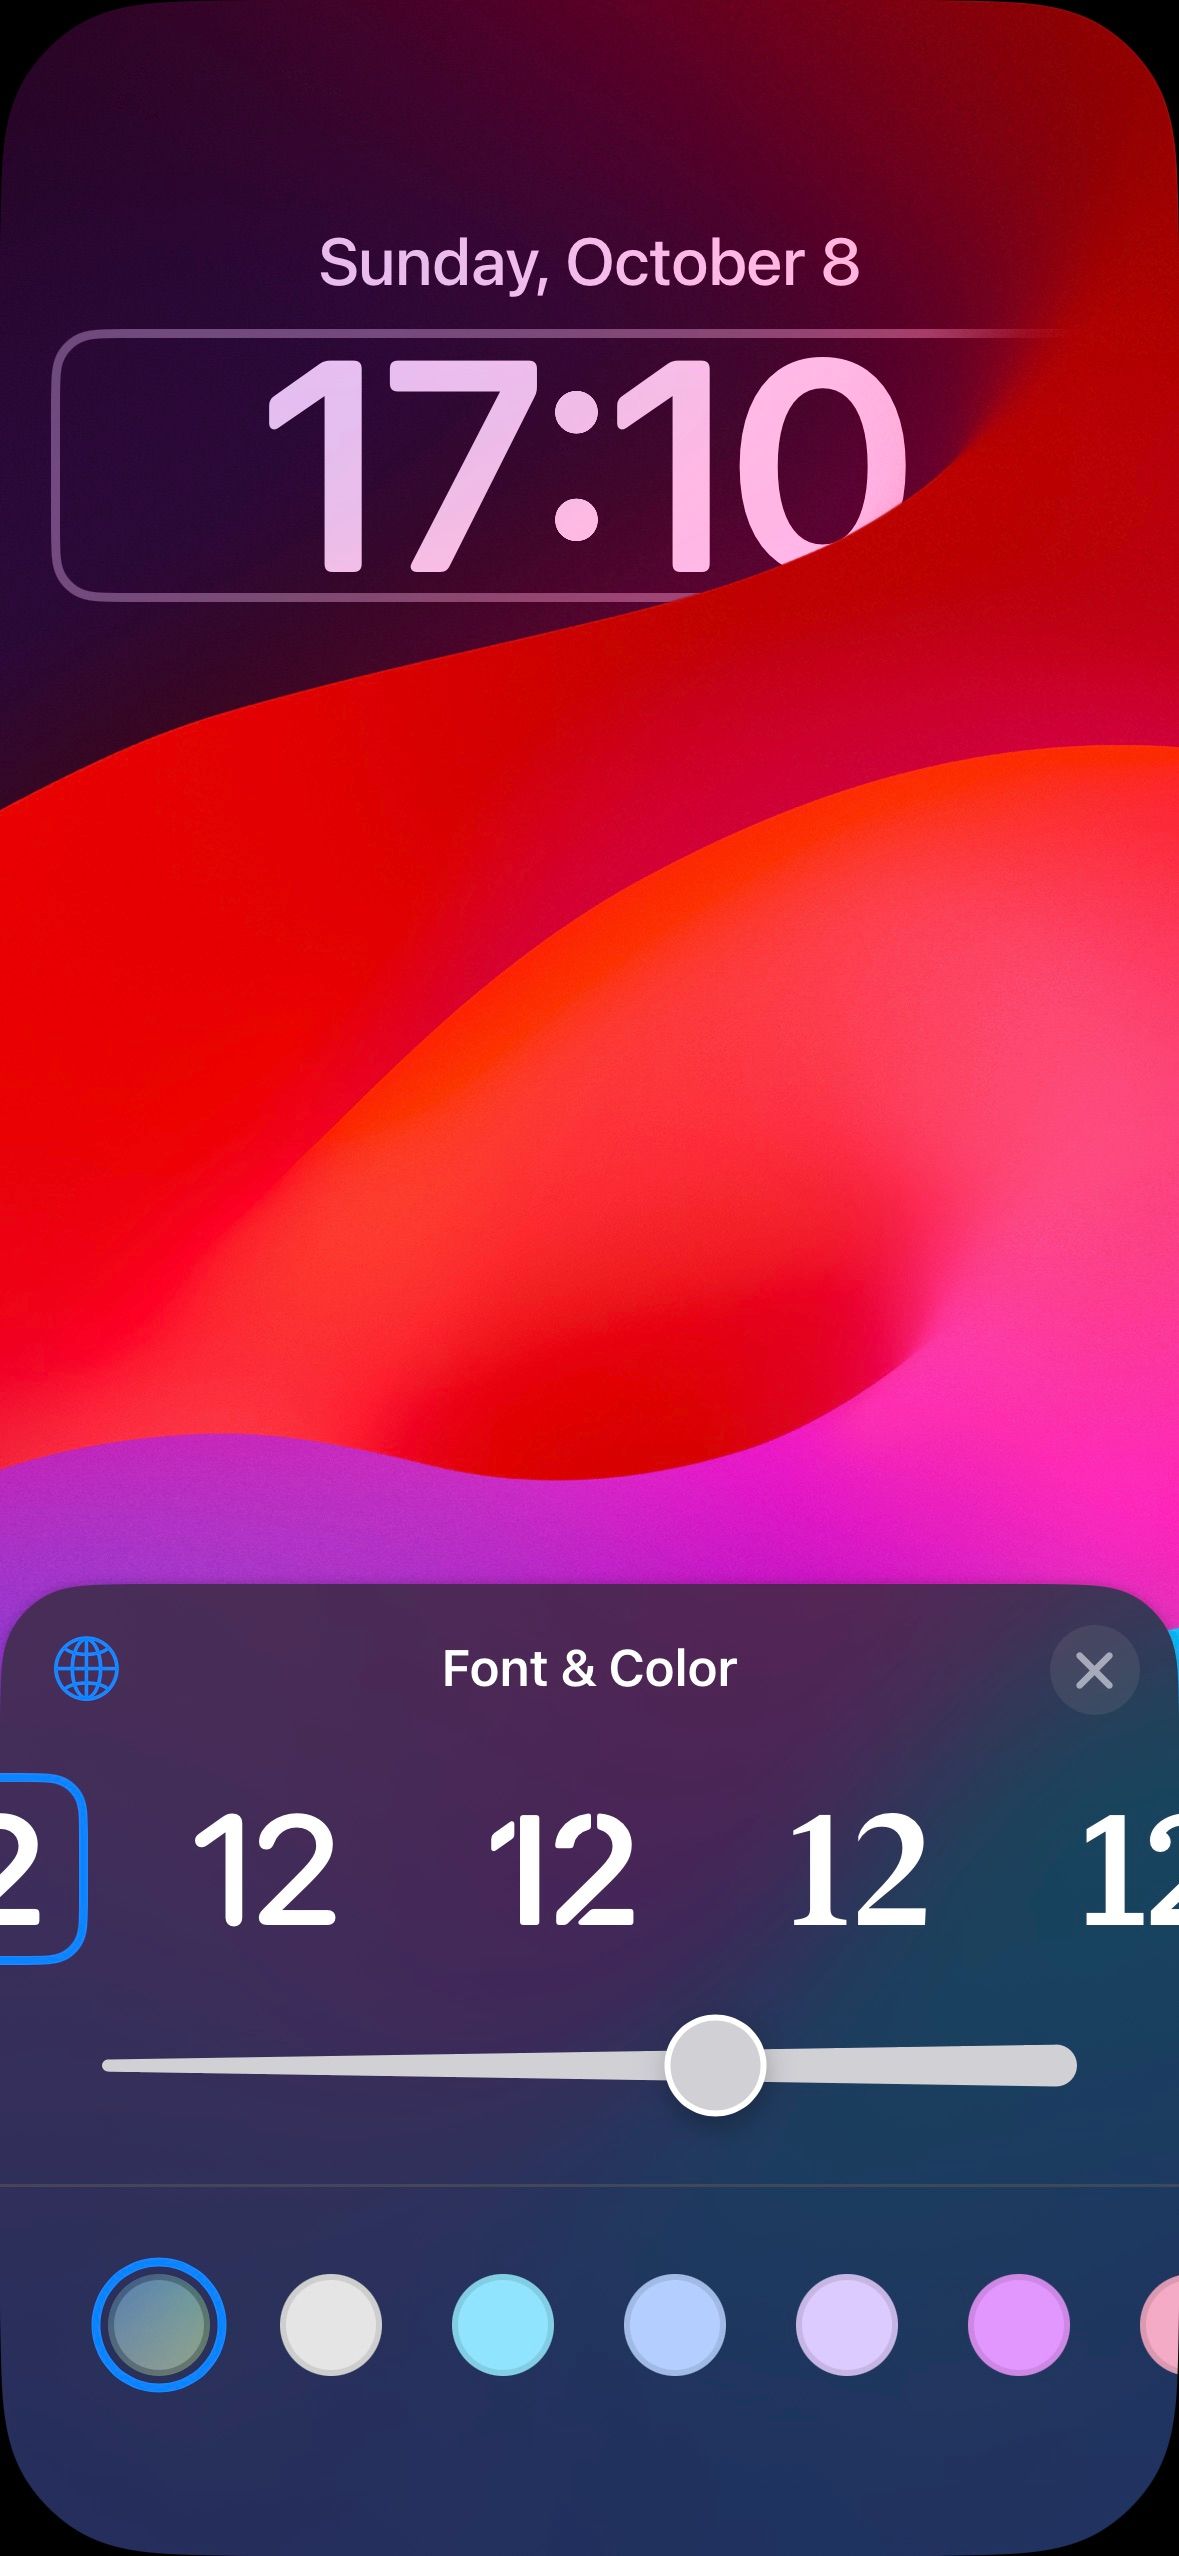 sub menu to choose which font should be used for the clock on iOS Lock Screen